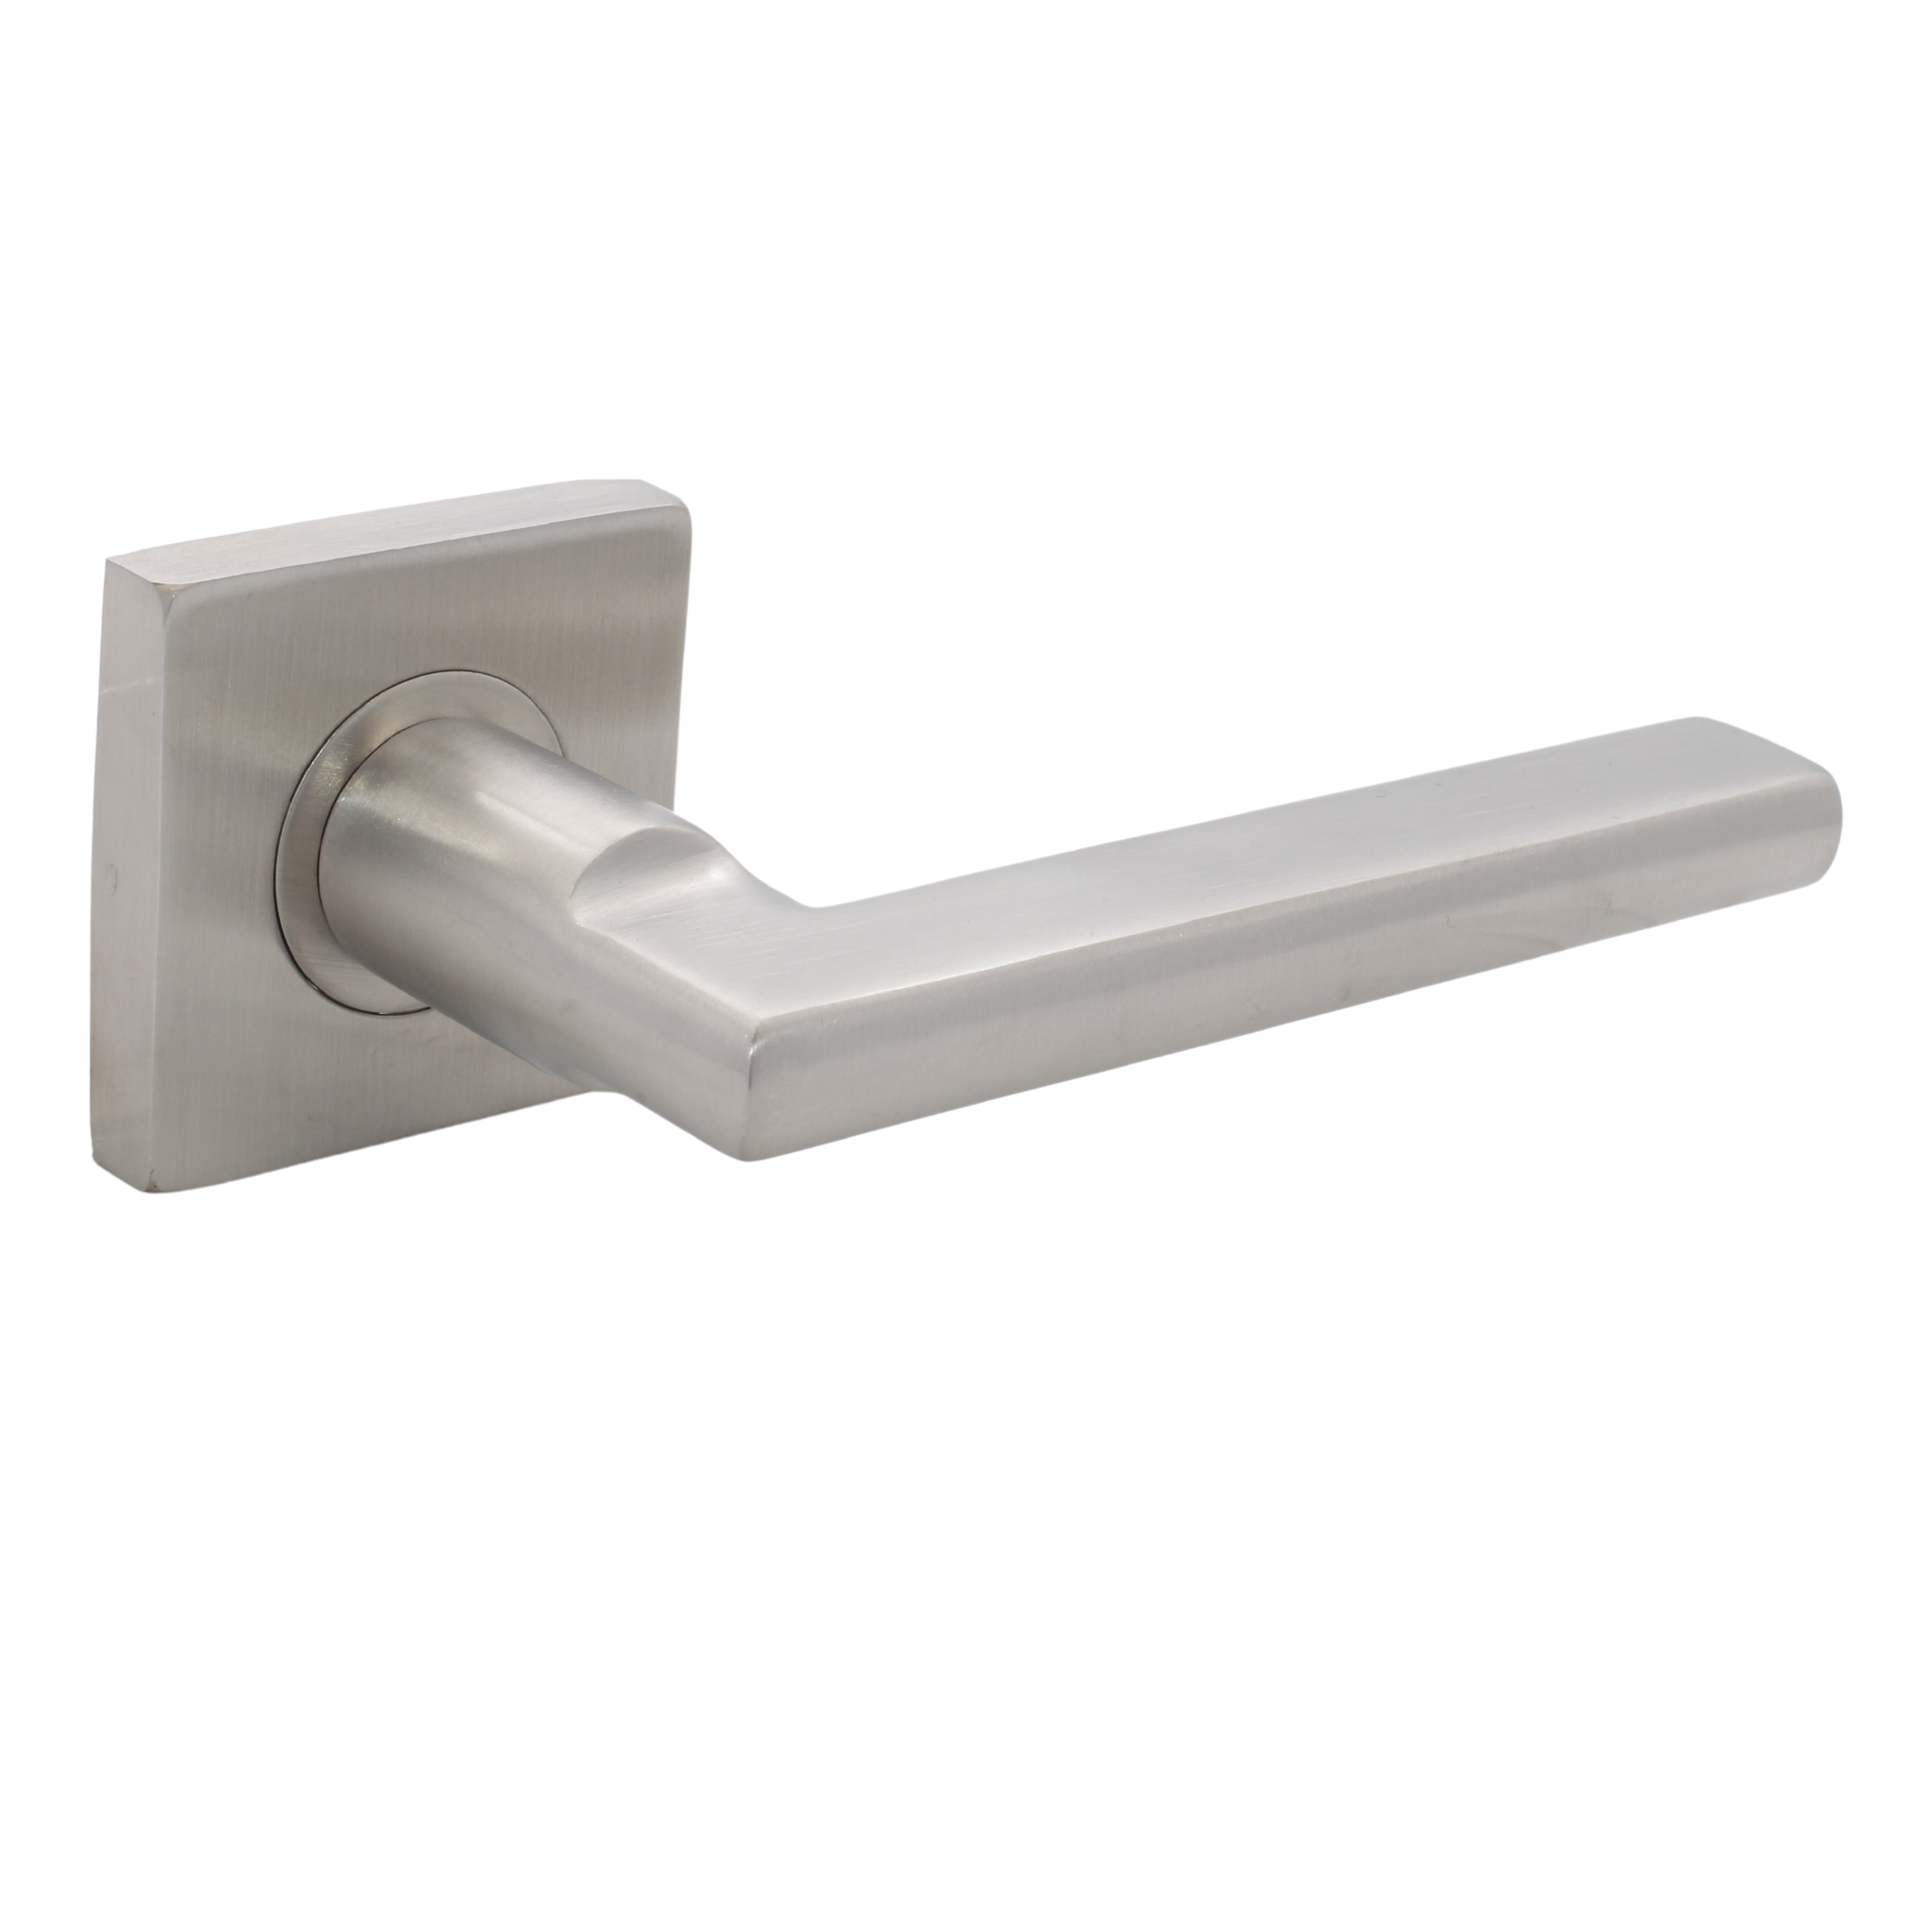 FS103.S._.SS, Lever Handles, Solid, On Square Rose, With Escutcheons, 134mm (l), Stainless Steel, CISA